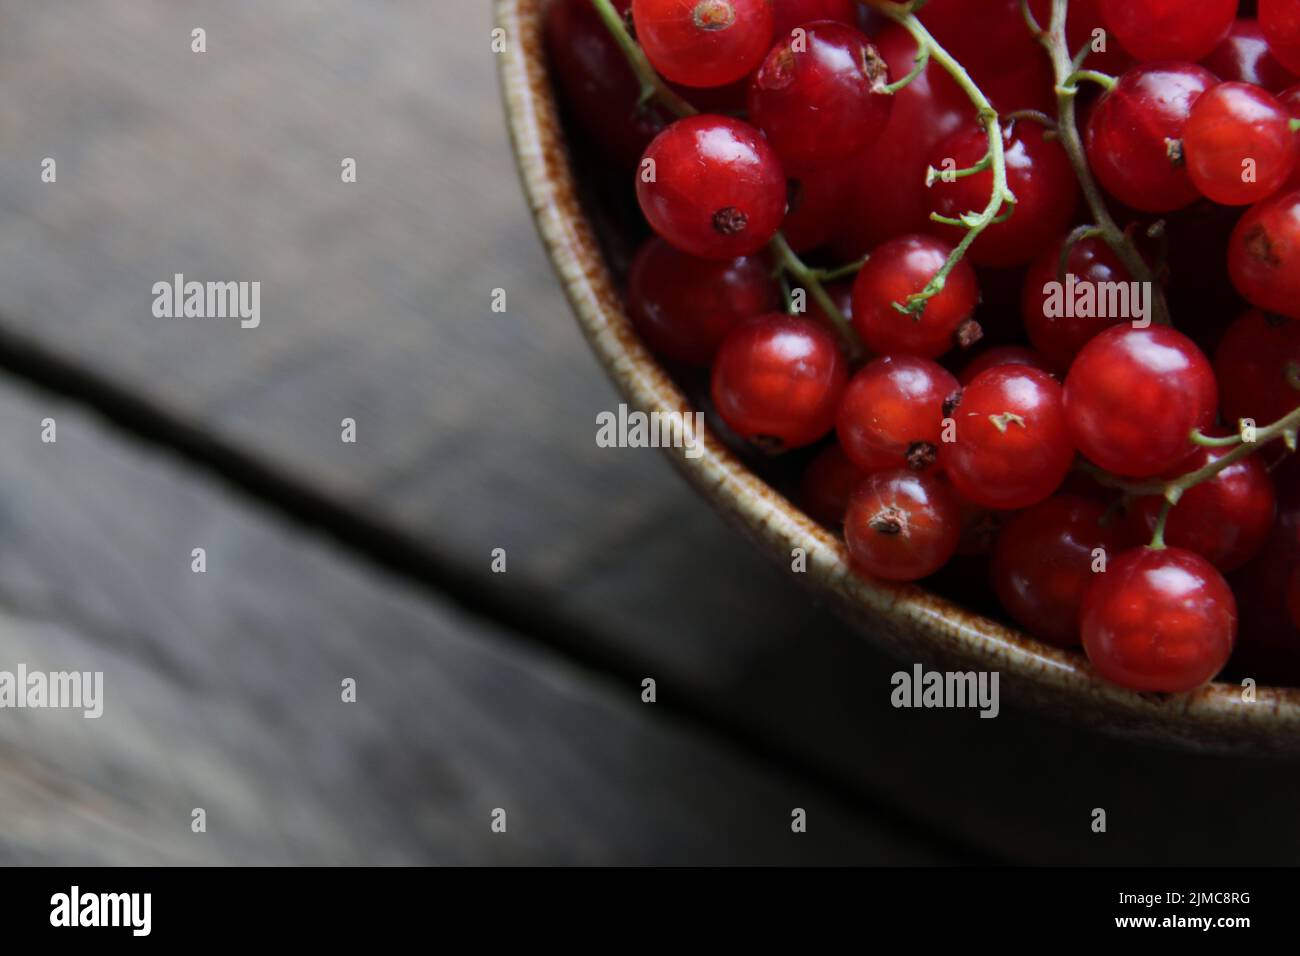 Ripe red currant in a cup on vintage background Stock Photo